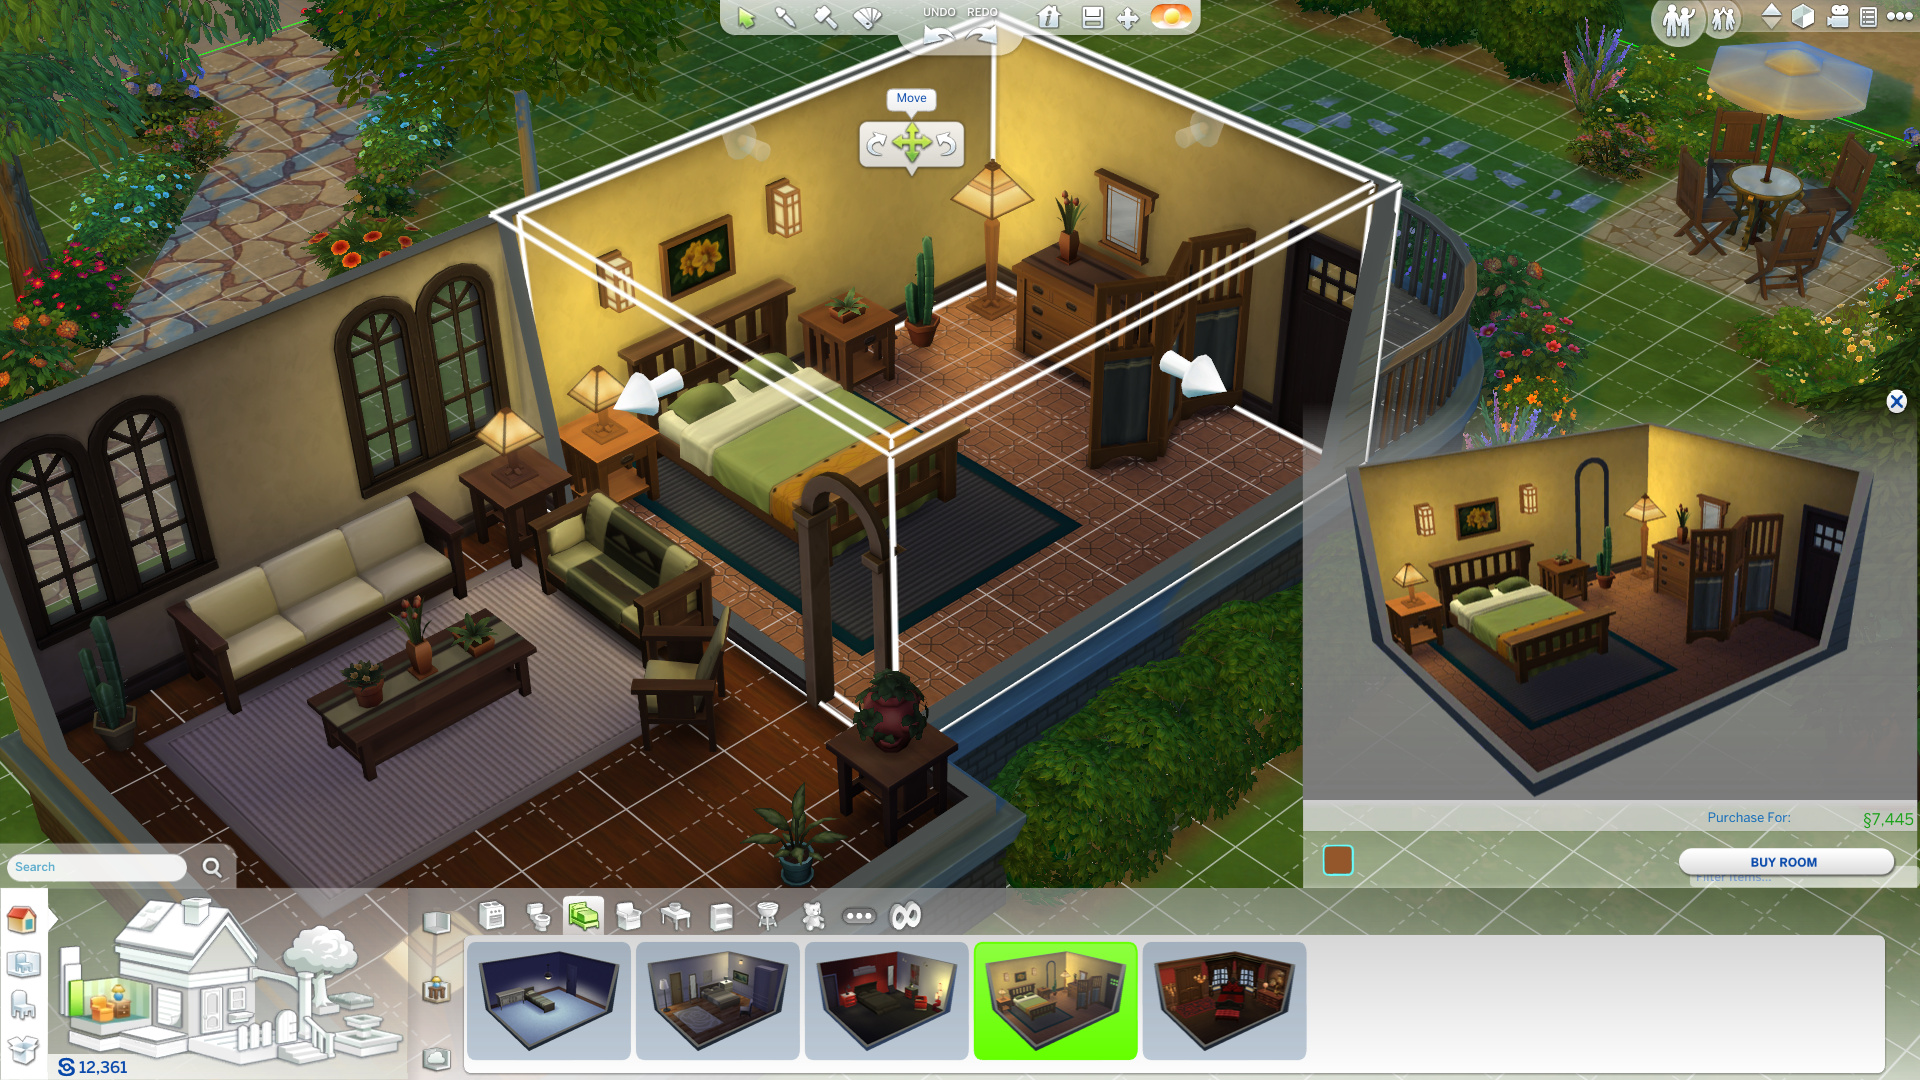 Features Of The Sims 4: